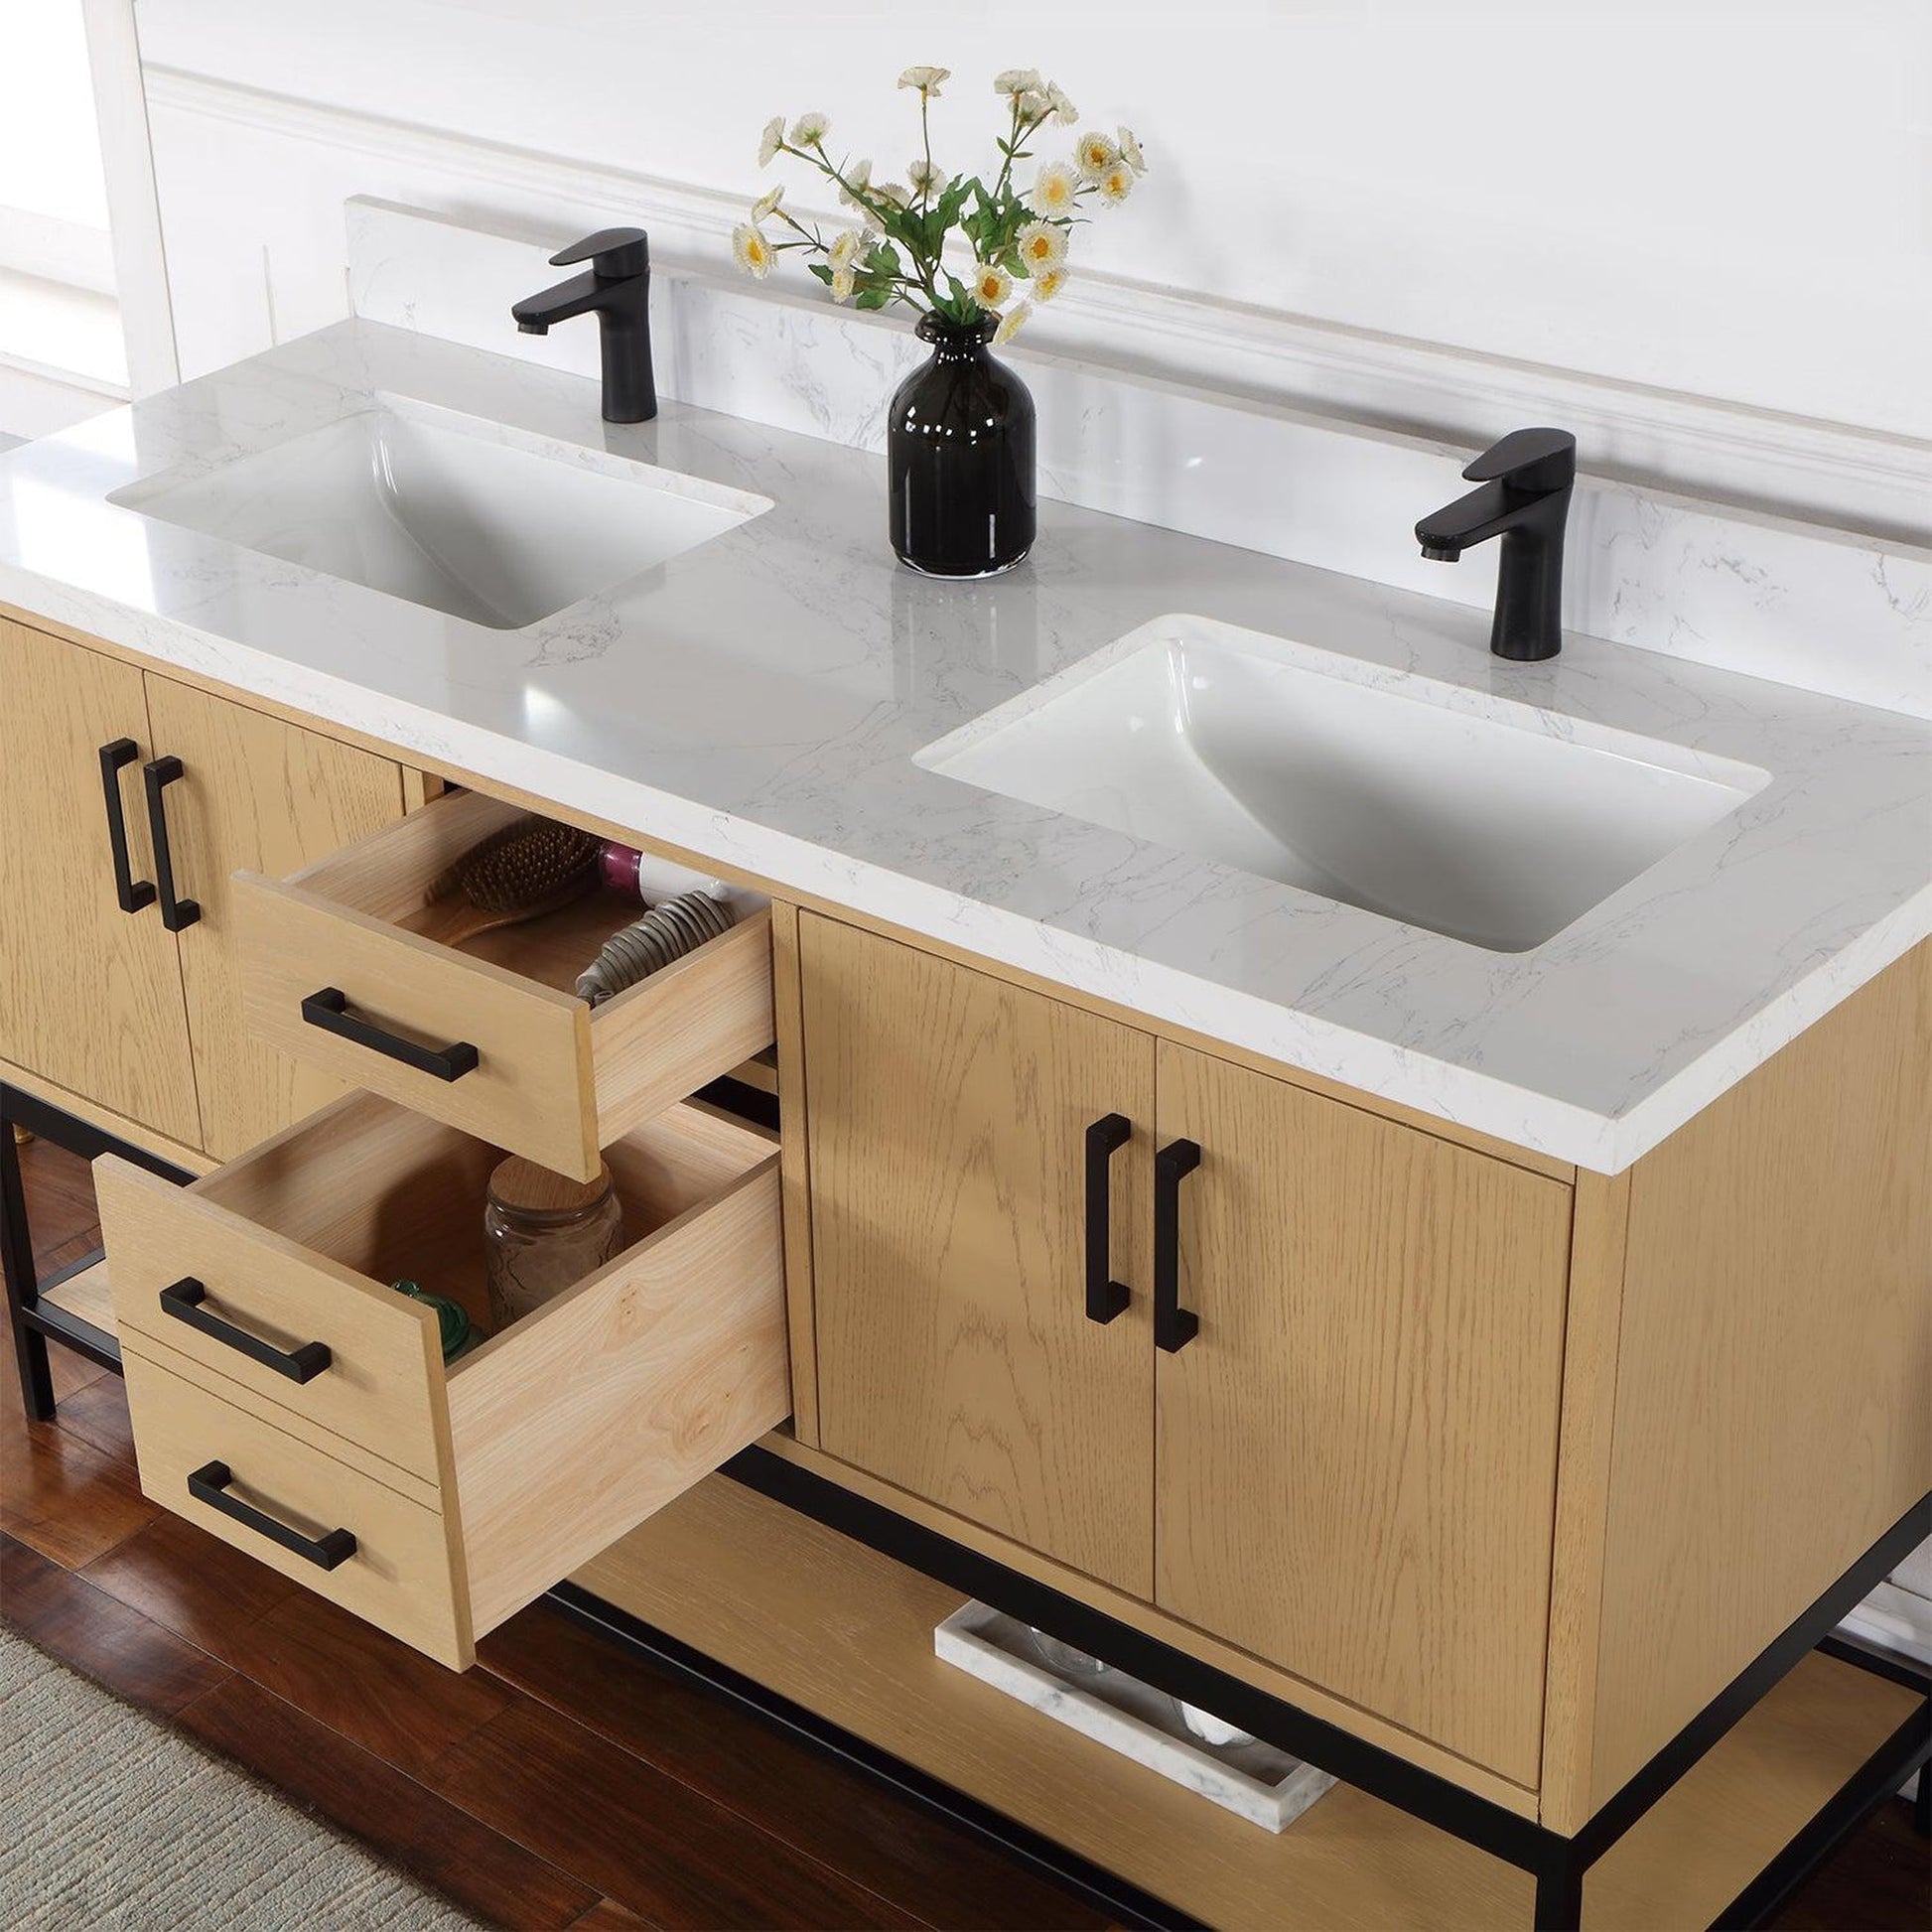 Altair Wildy 60" Washed Oak Freestanding Double Bathroom Vanity Set With Stylish Composite Grain White Stone Top, Two Rectangular Undermount Ceramic Sinks, Overflow, and Backsplash